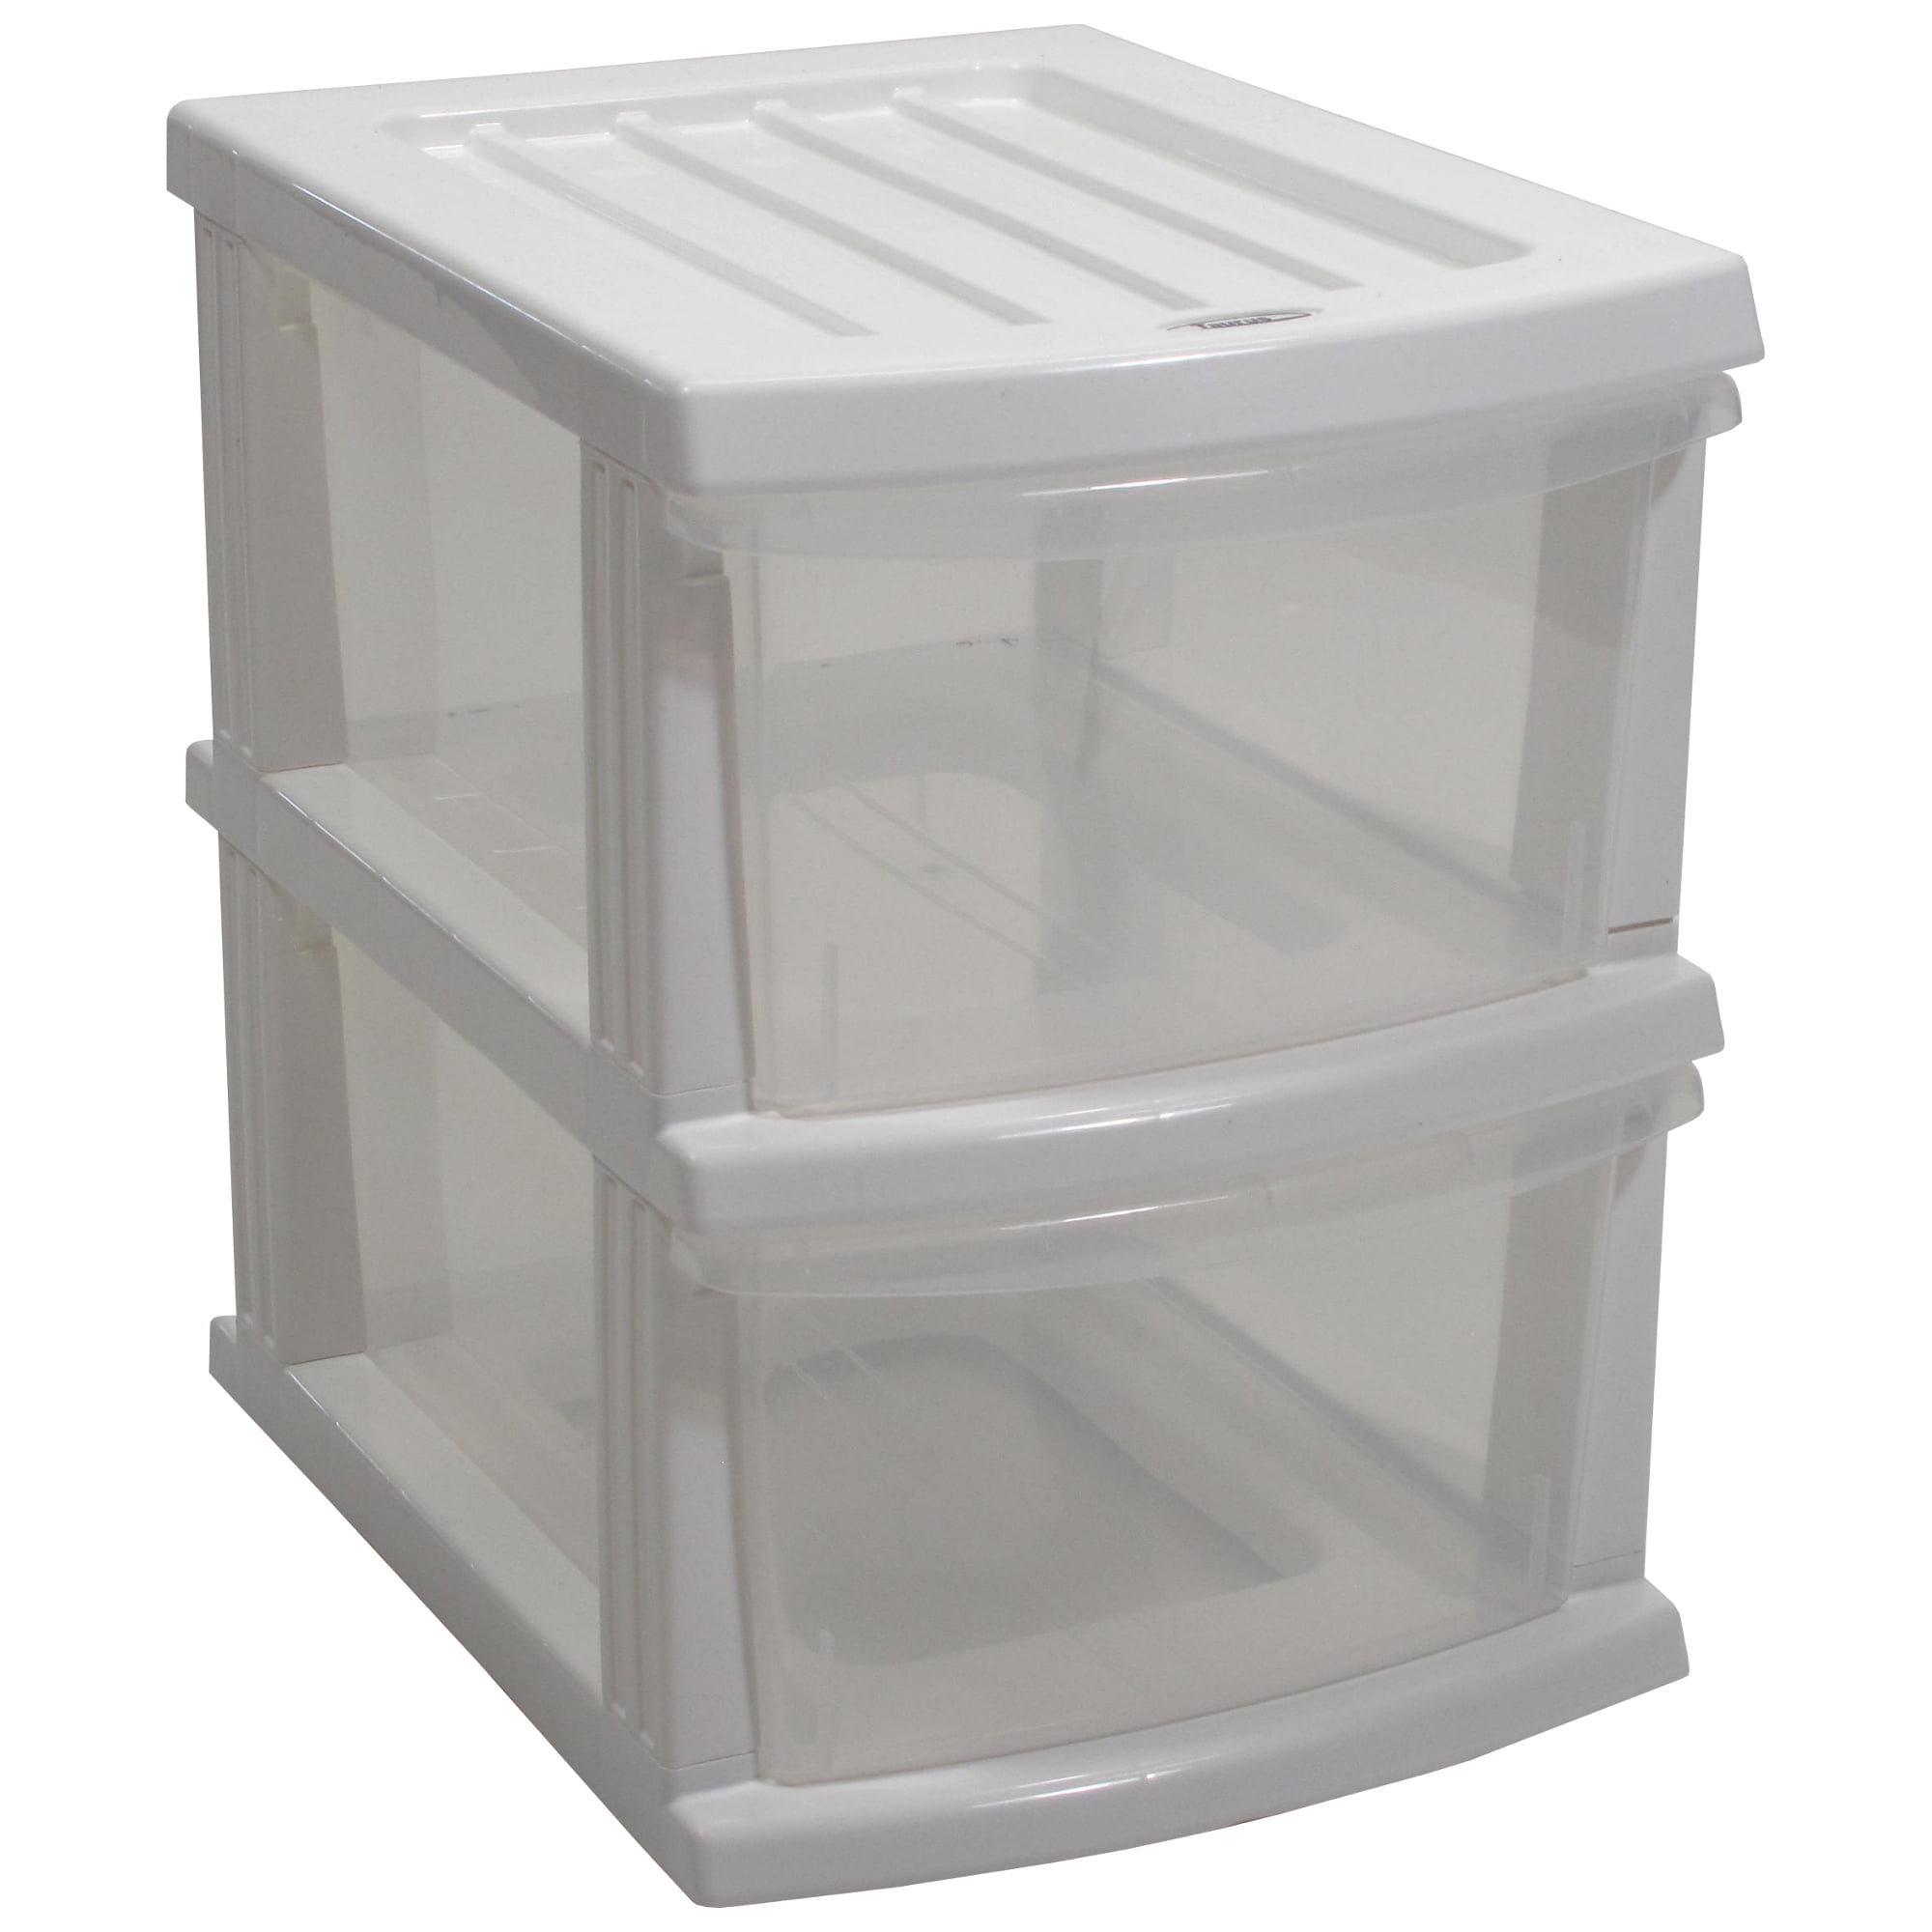 Plastic Office St.Oswalds 2 Storage Drawer Tower Clear Drawers Easily Identify Contents Dimensions: 50 x 43 x 22 Centimeter Storage 2 Clear Drawers with Wheels Drawer Organiser 